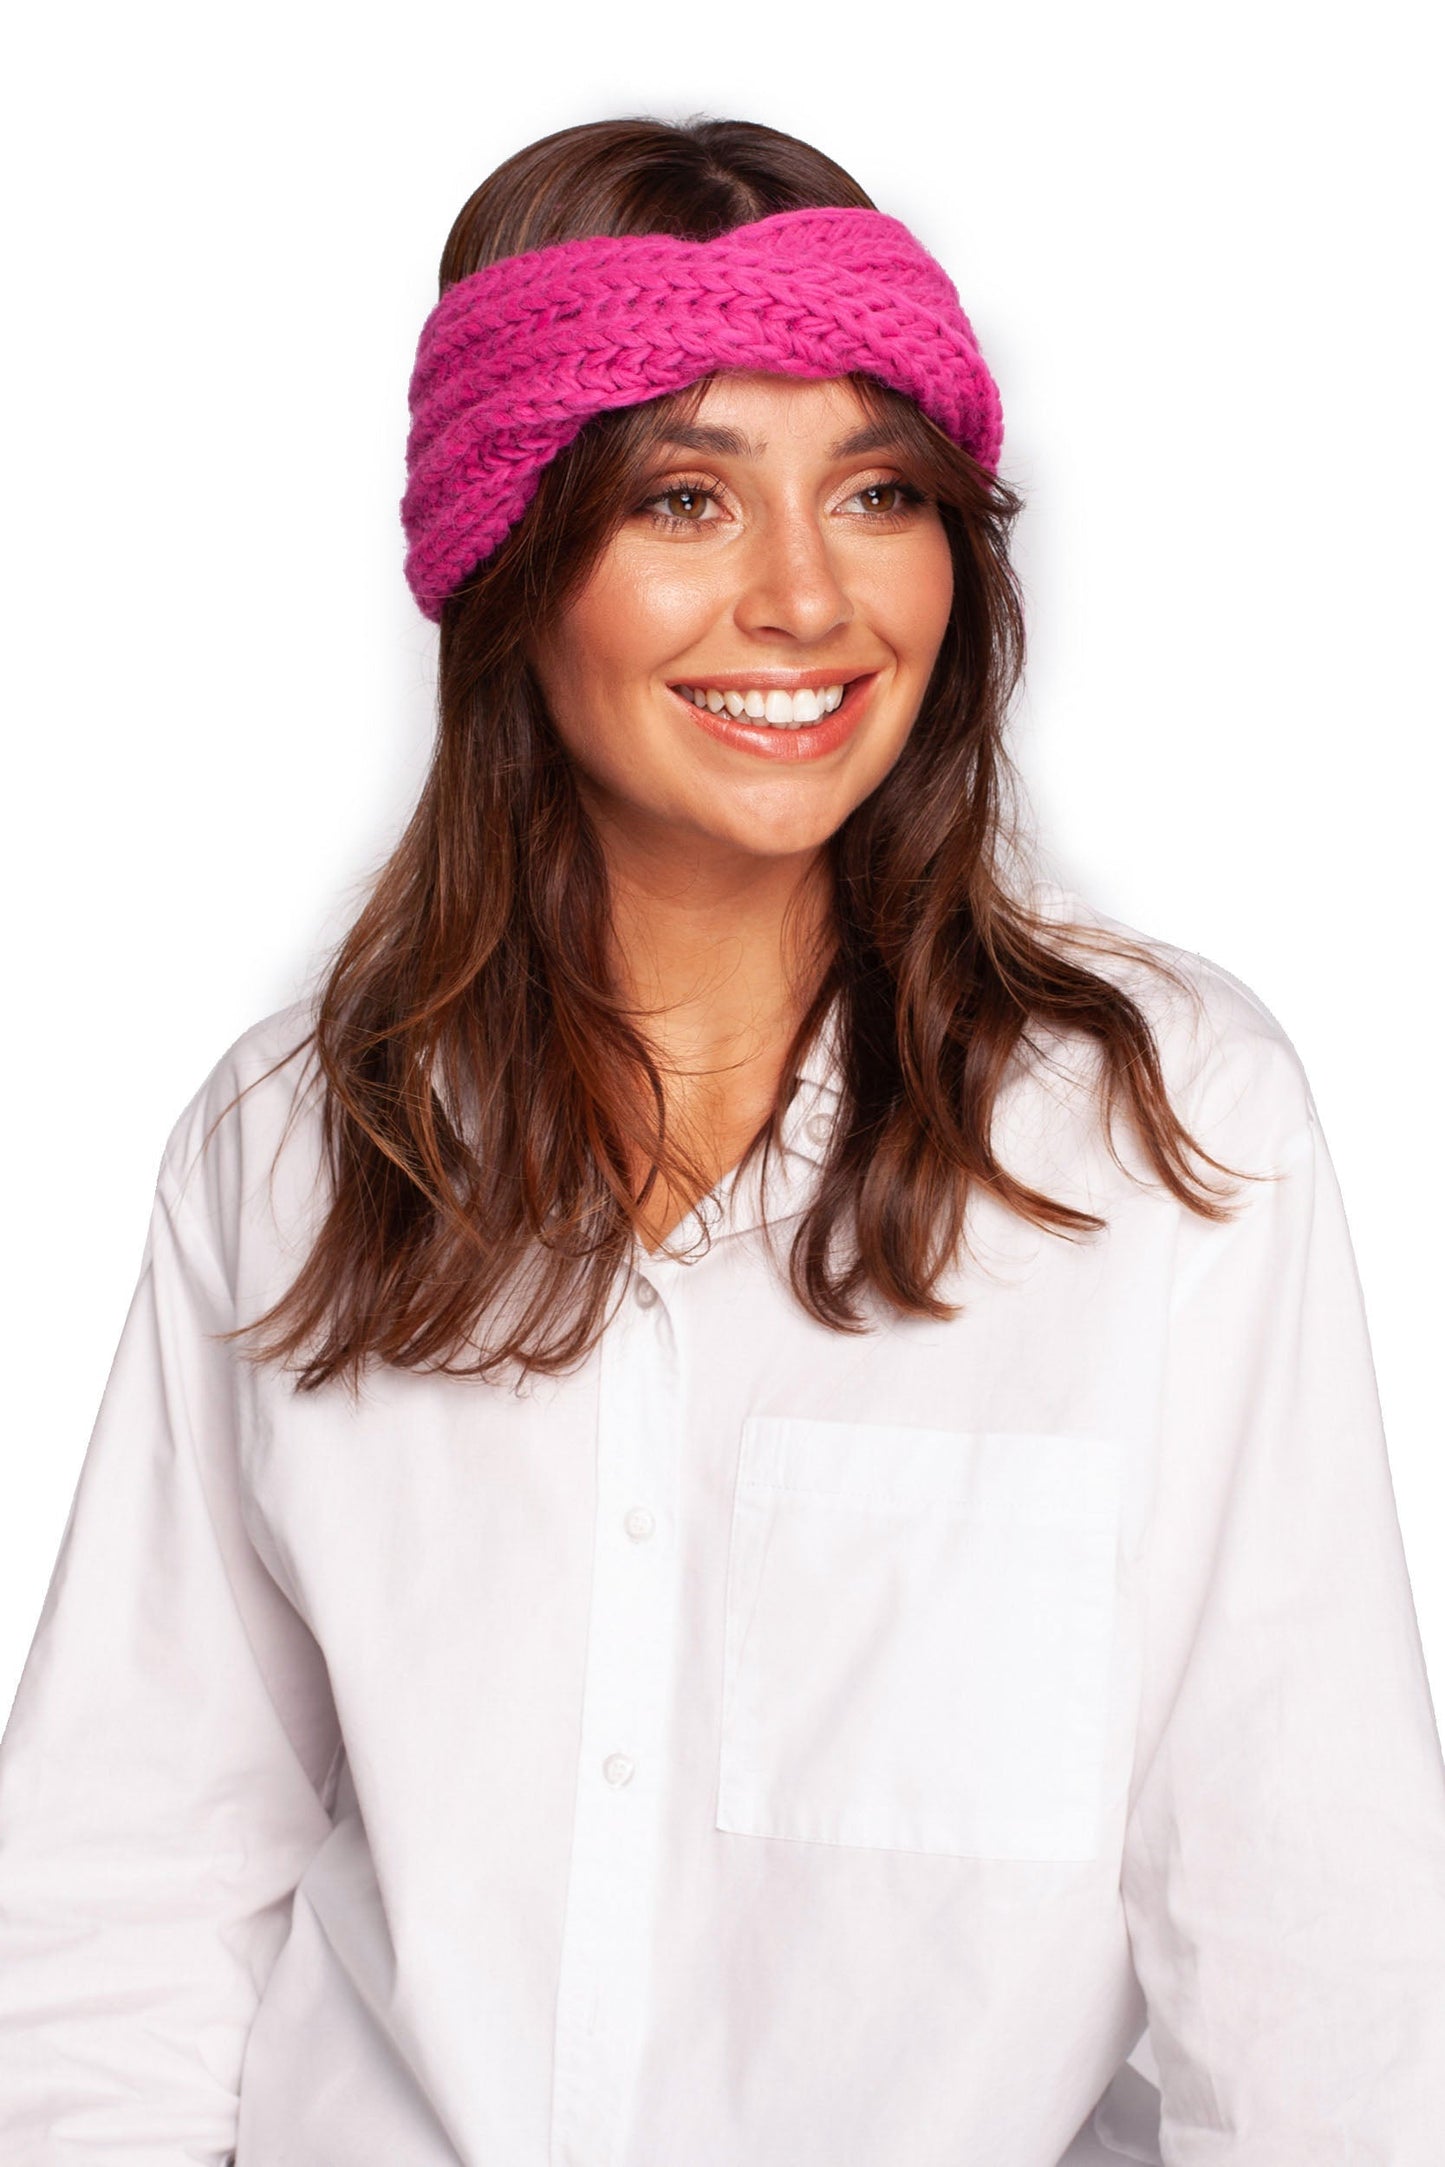 Band model 171240 Elsy Style Caps & Hats for Women